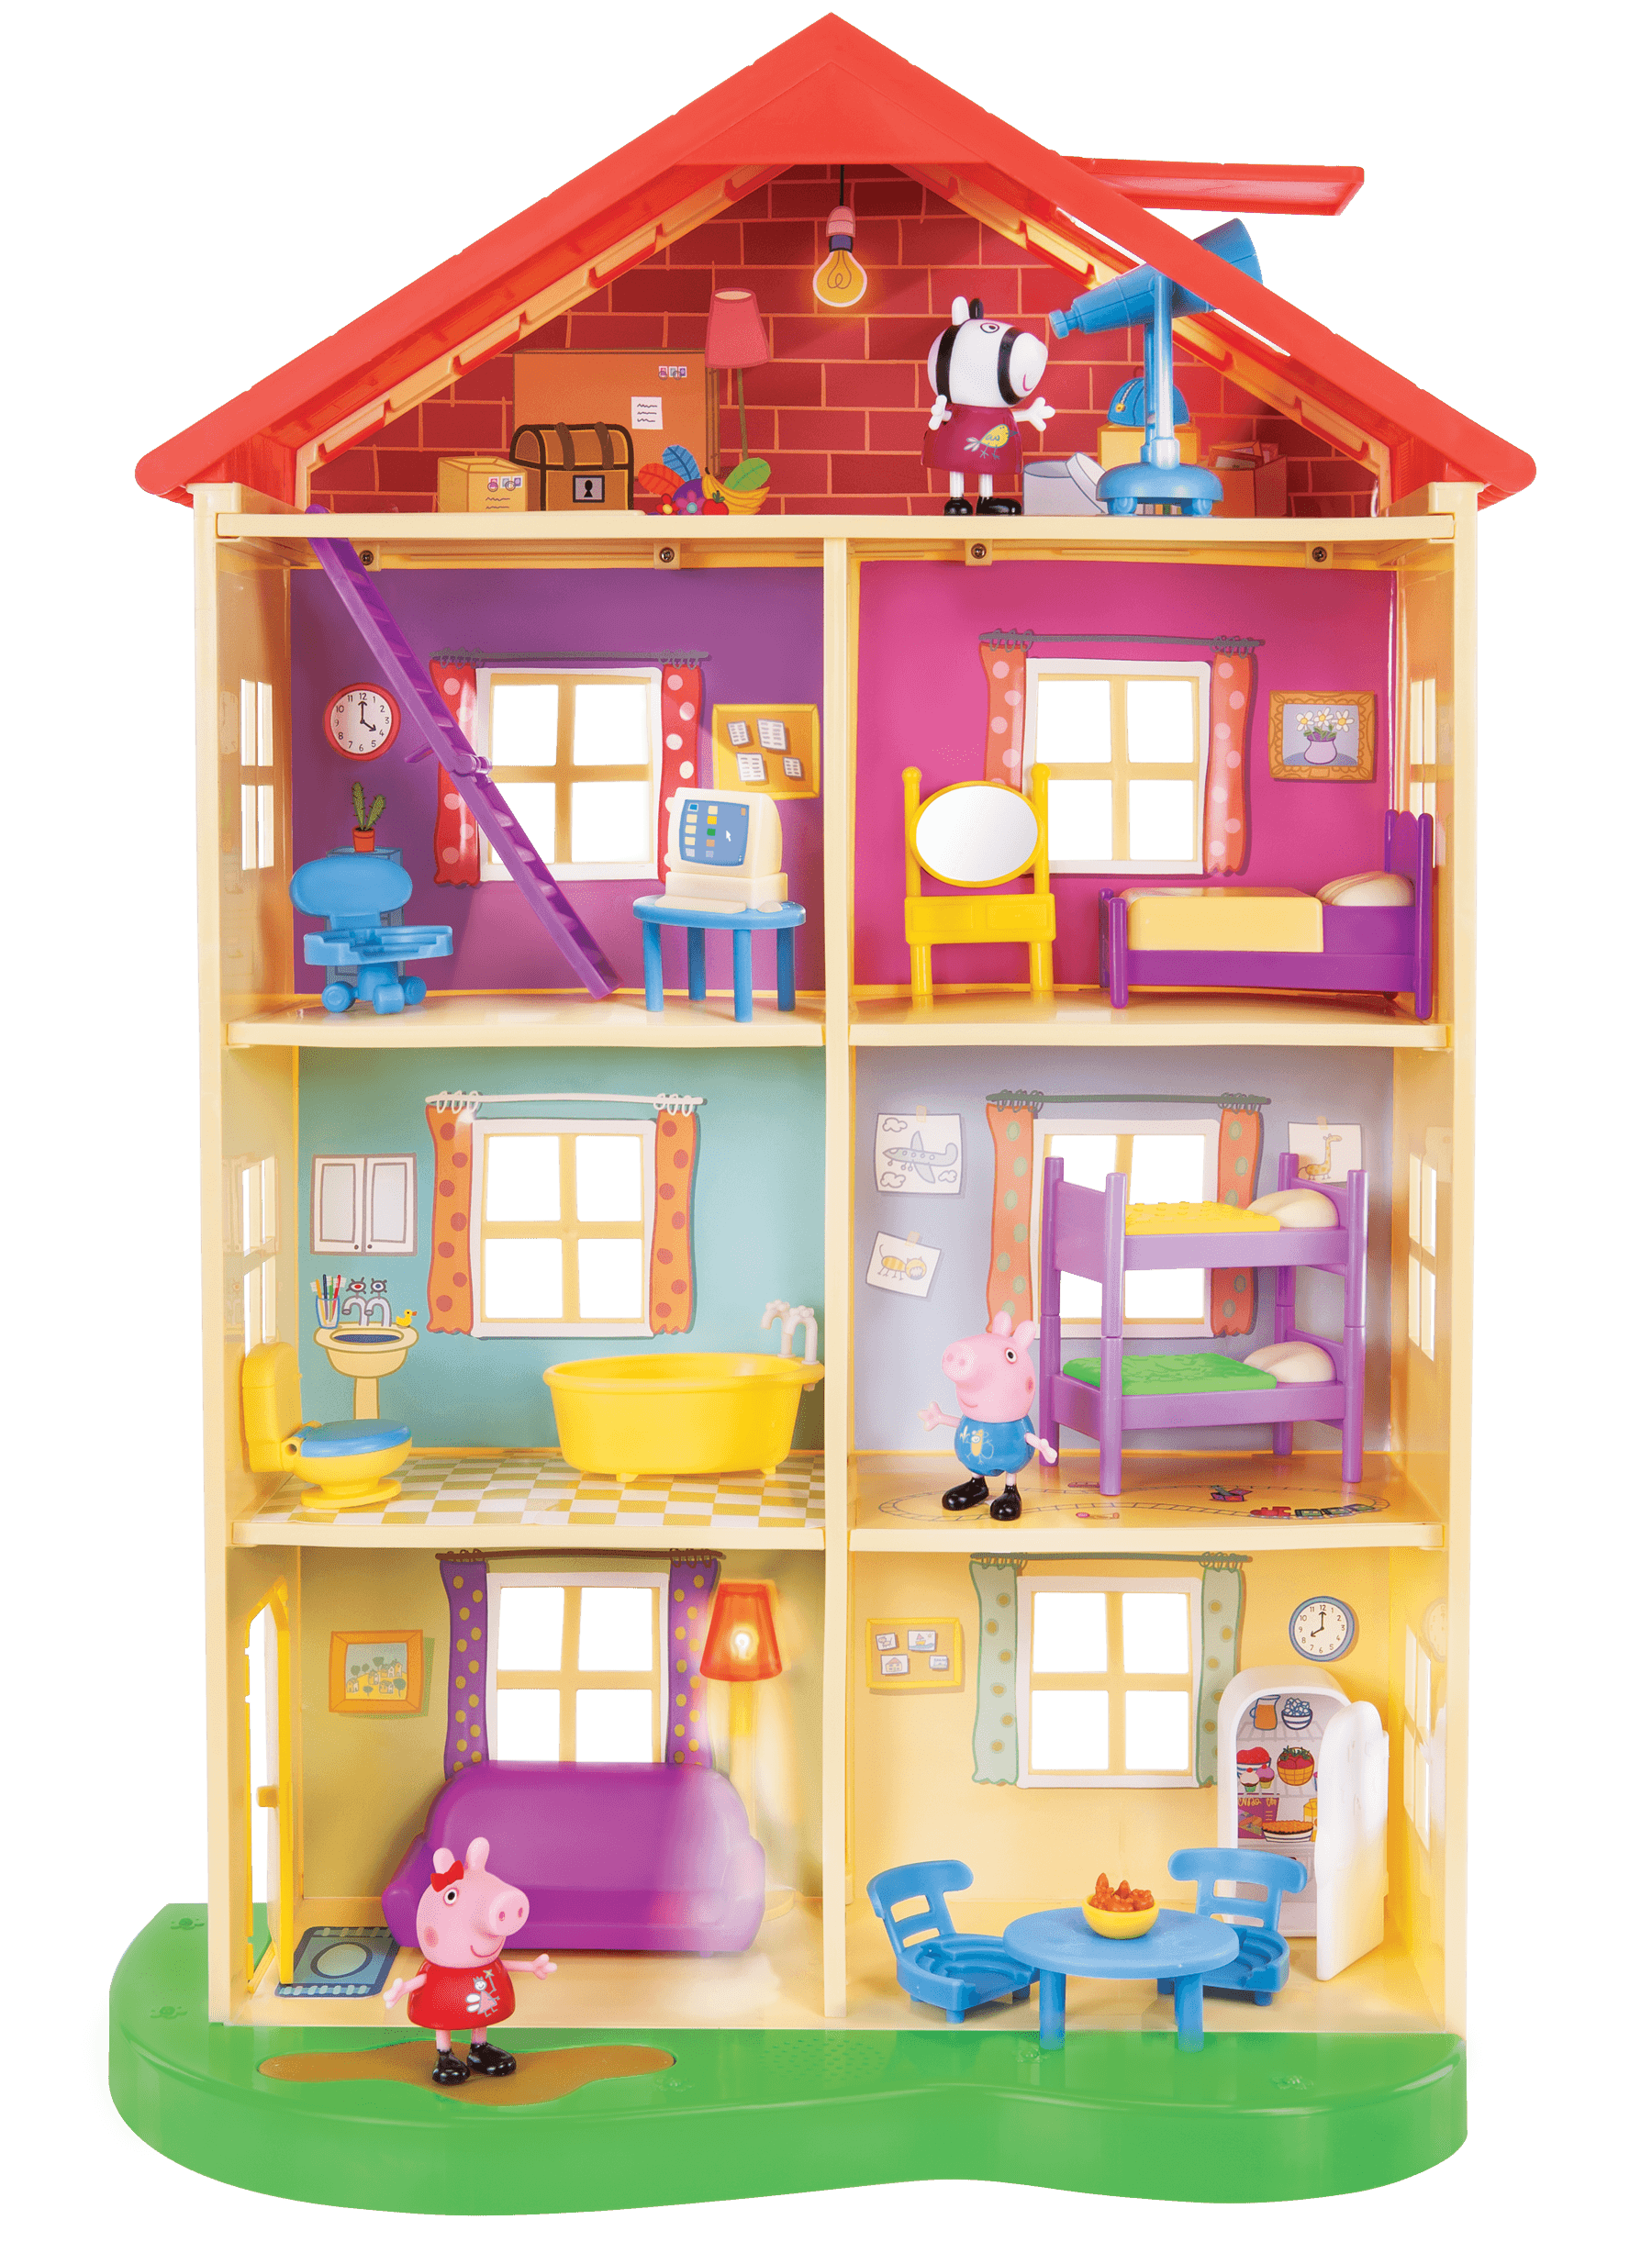 Peppa Pig Lights and Sounds Family Home Playset - image 1 of 11